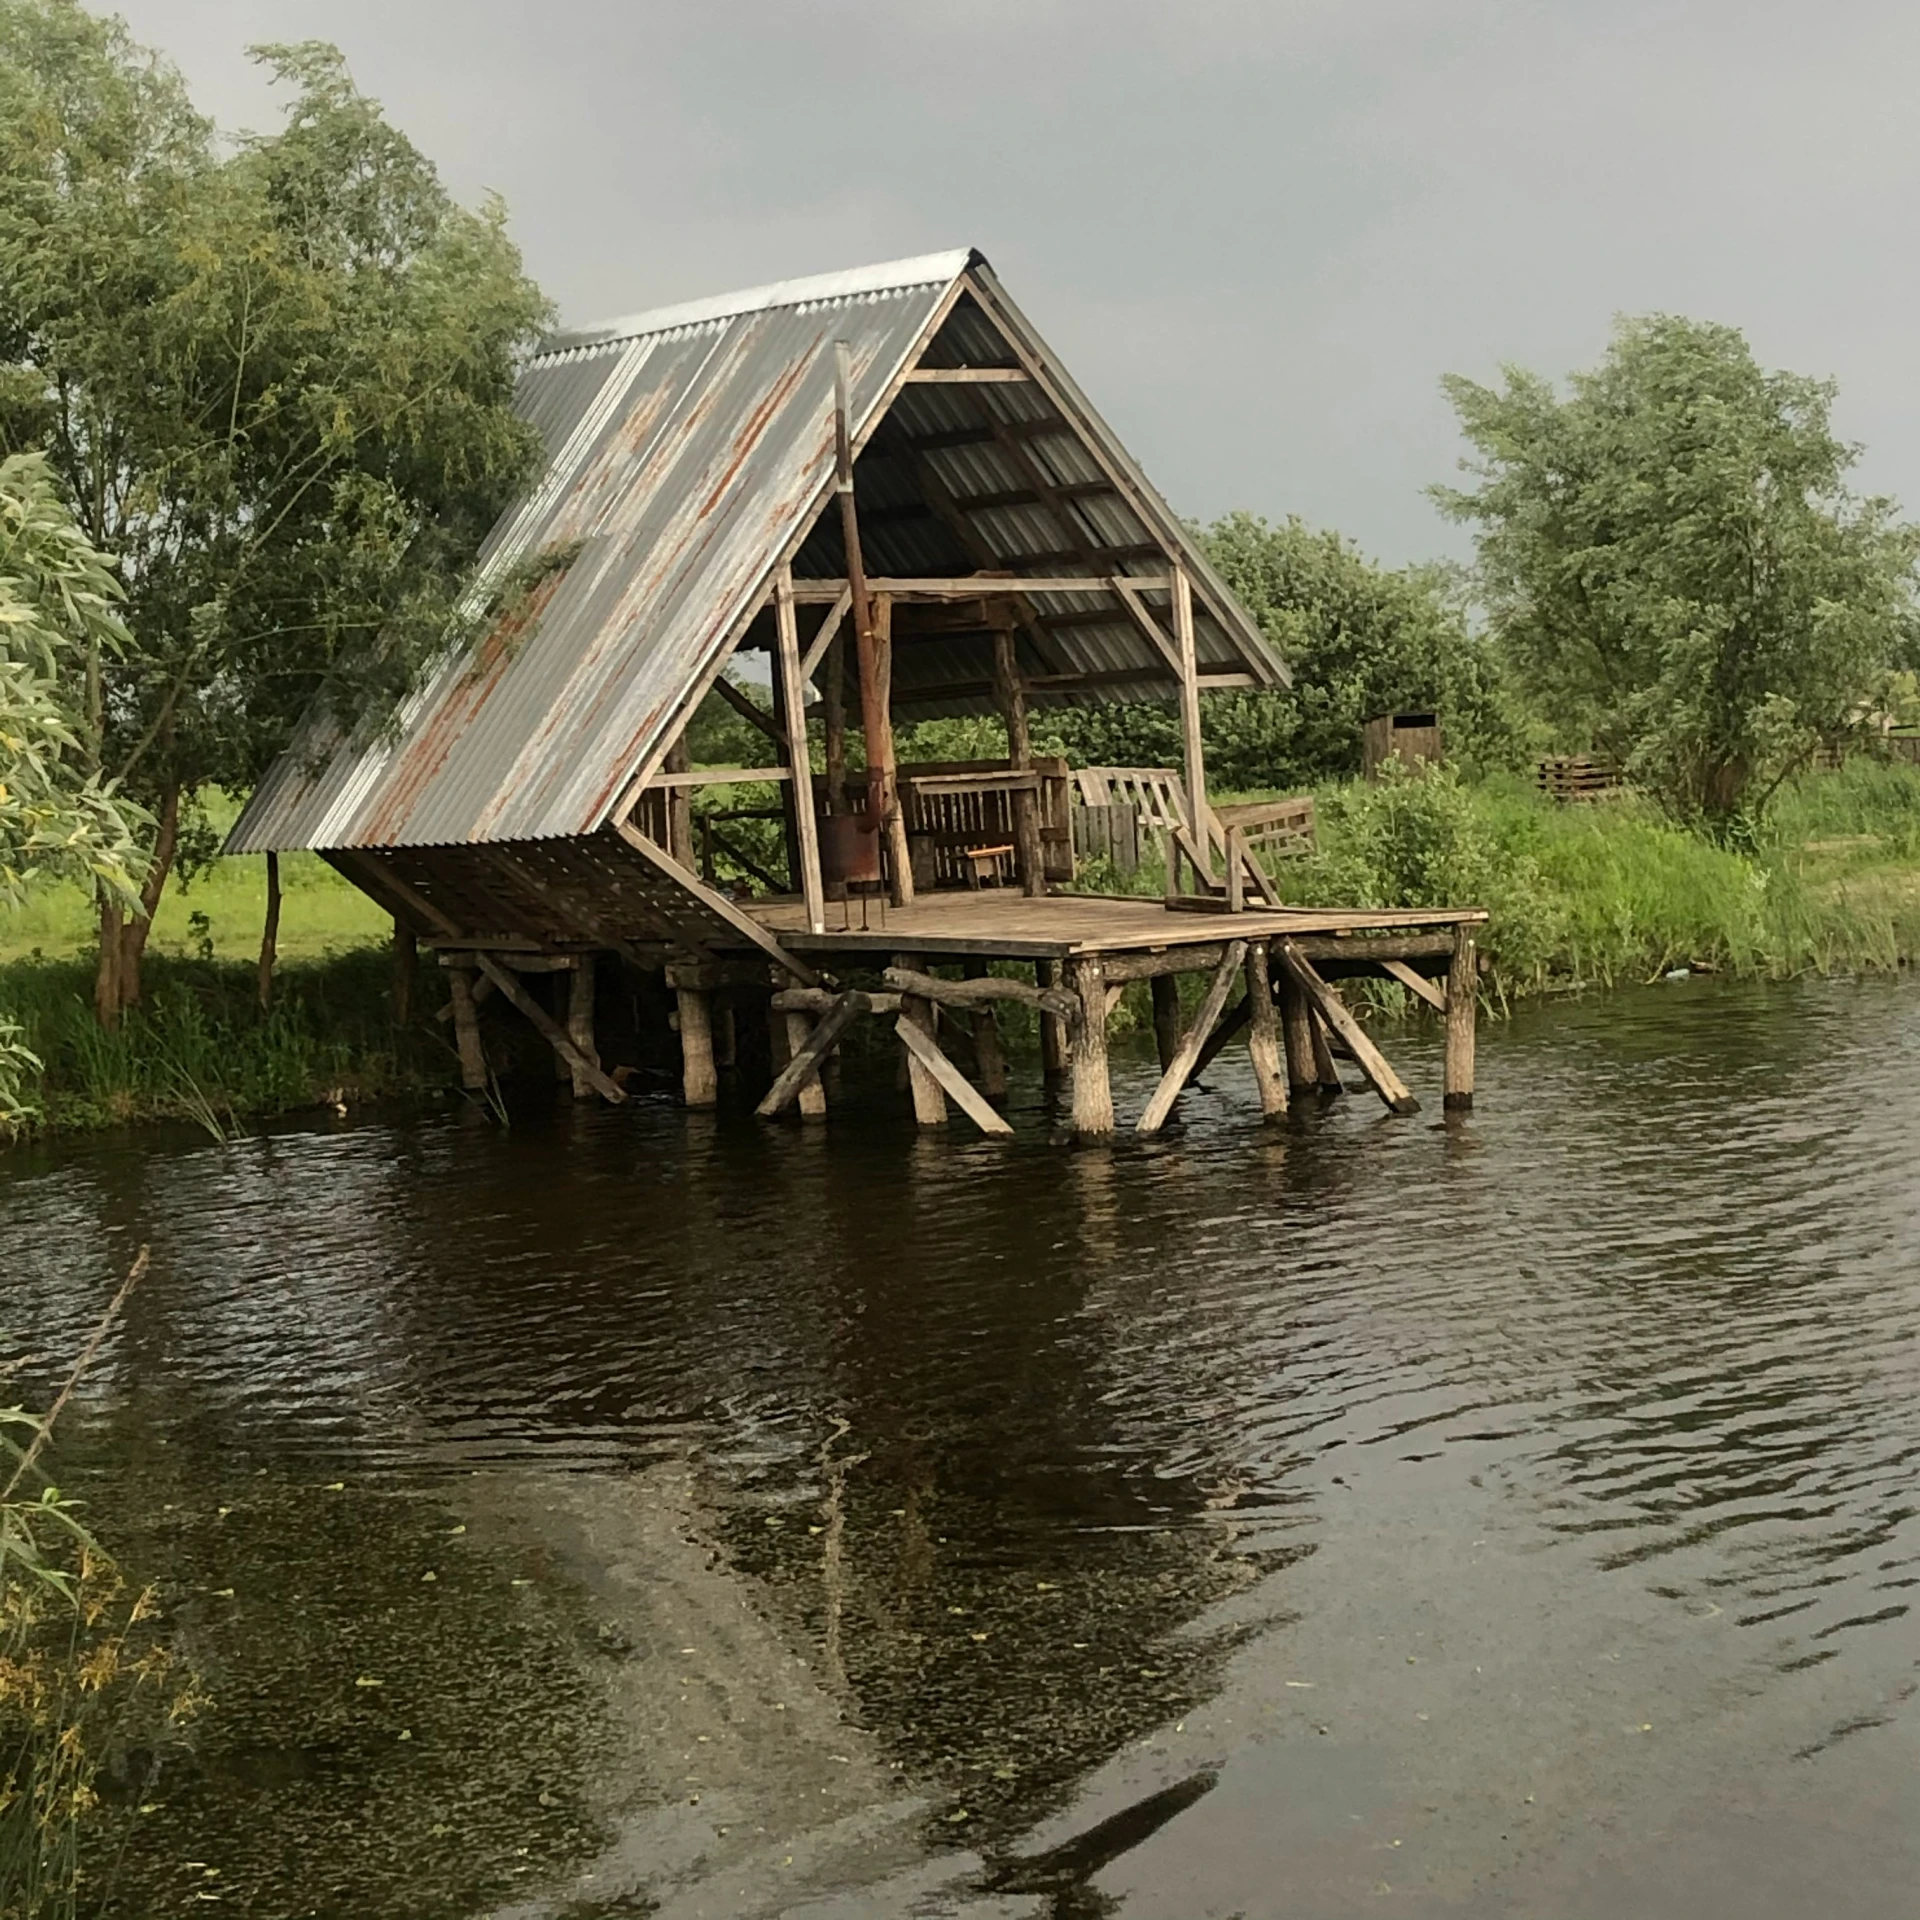 an hut built to sit on the edge of a body of water